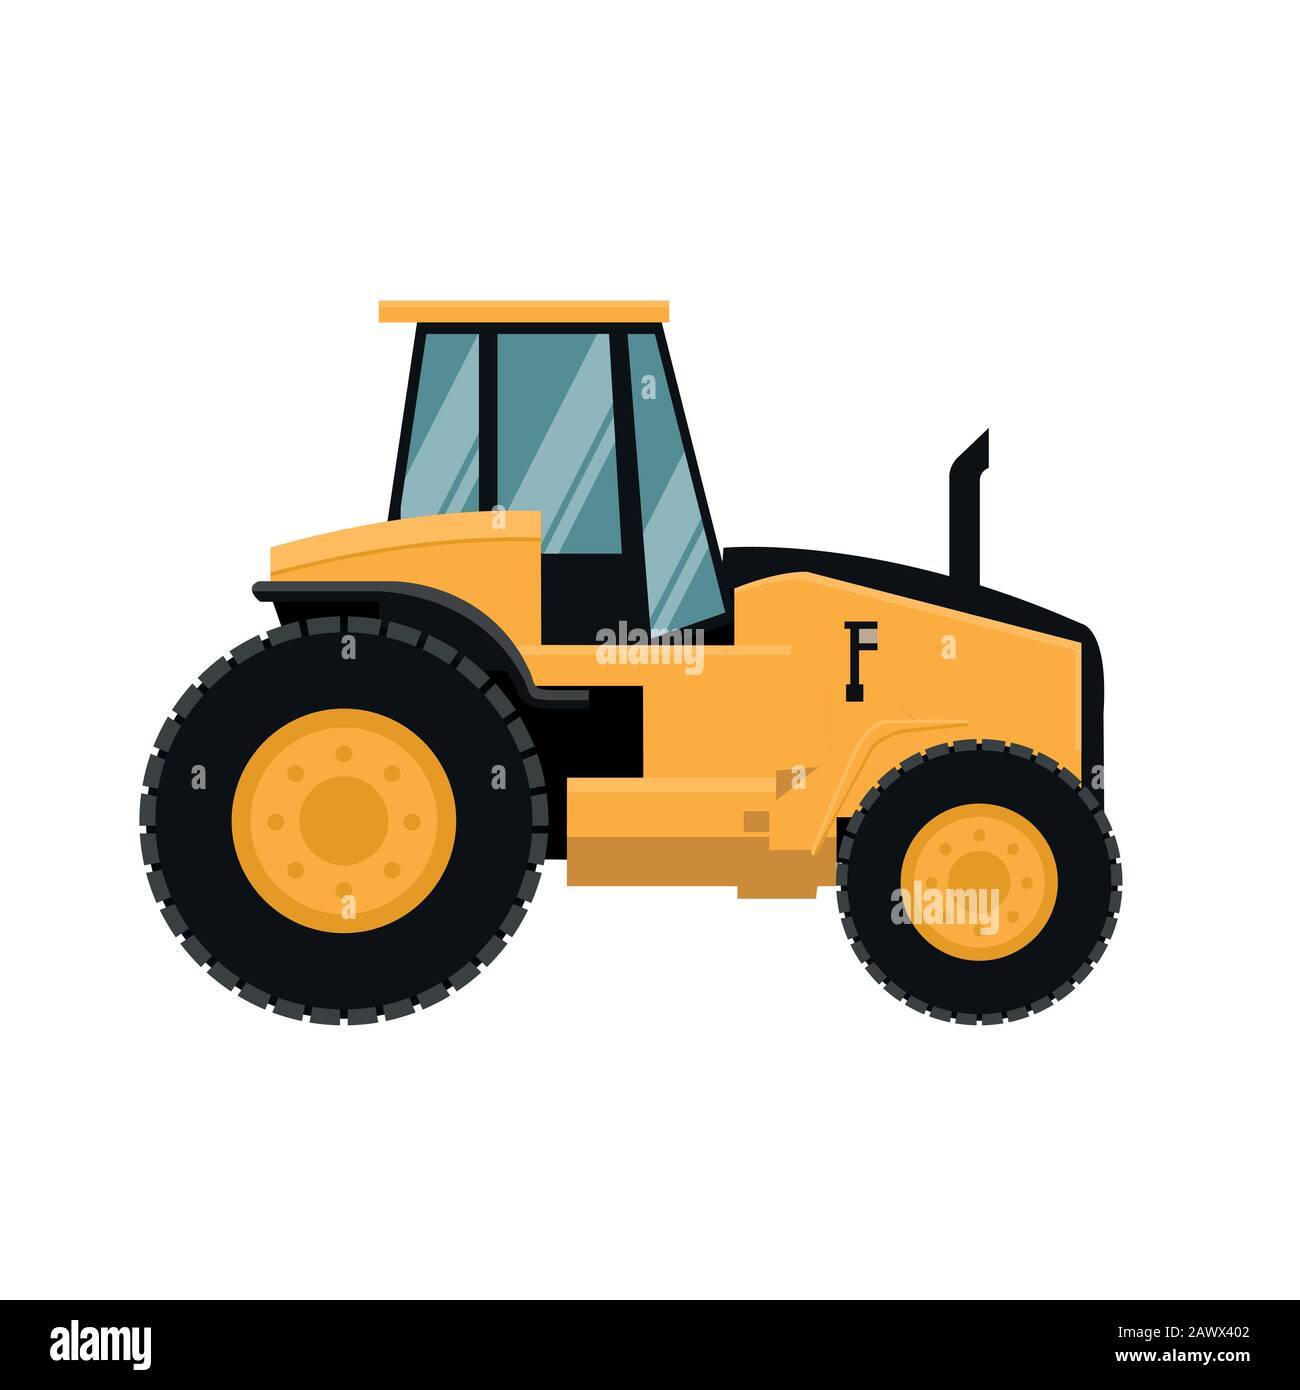 Vector design of agricultural tractor. Heavy agricultural machinery for agricultural work Stock Vector